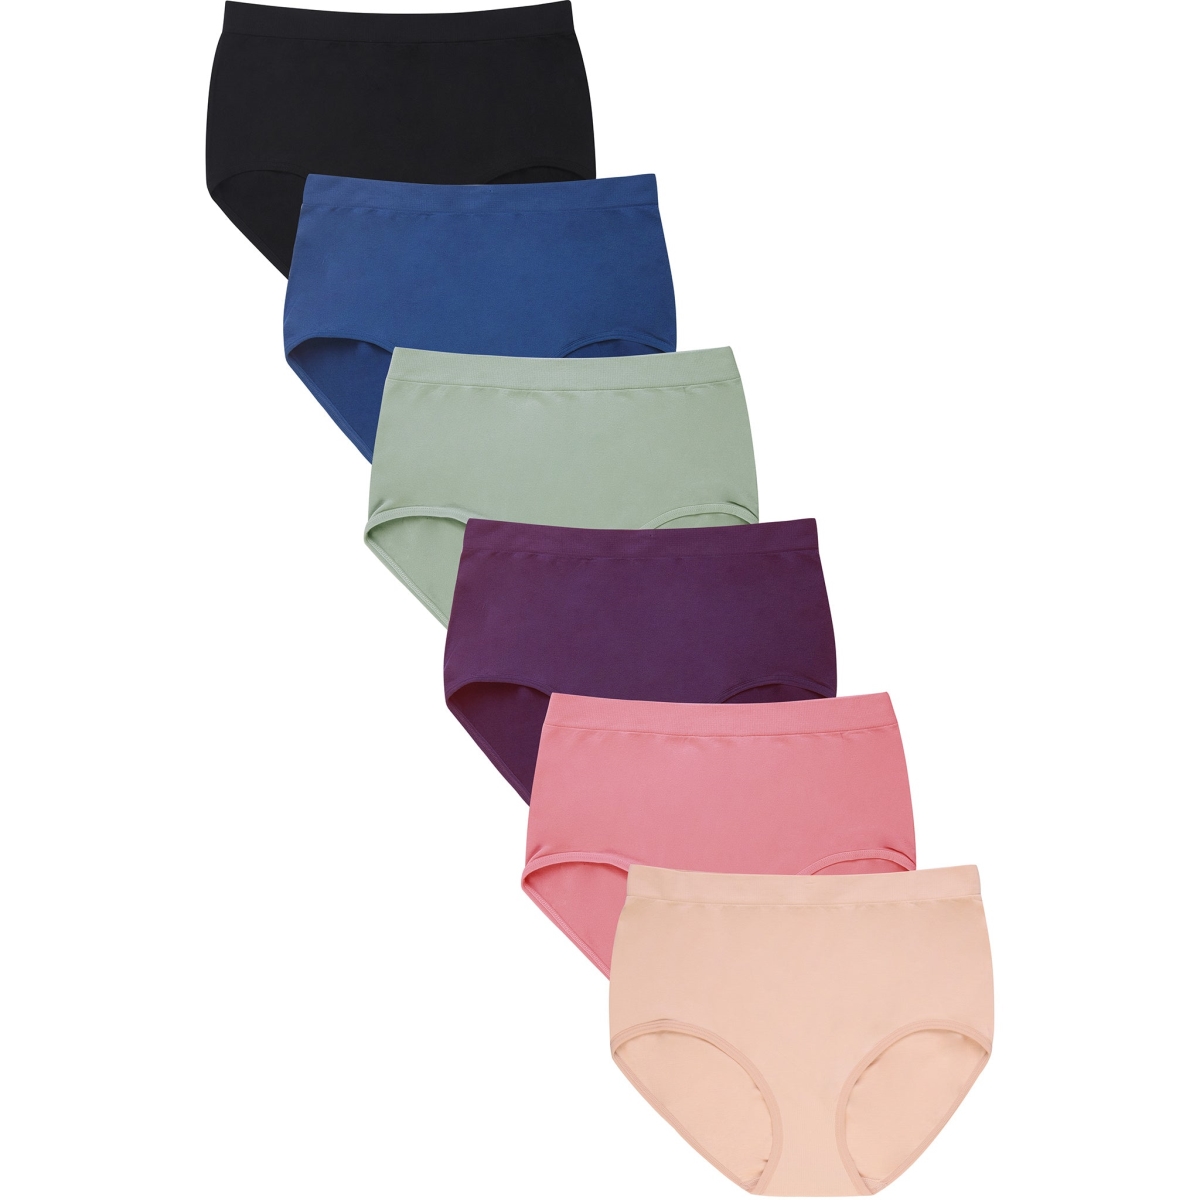 Picture of 247 Frenzy 247-LP0132SR8 Sofra Womens Essentials Seamless Nylon Stretch Brief Panty Underwear - Assorted Color - One Size - Pack of 6